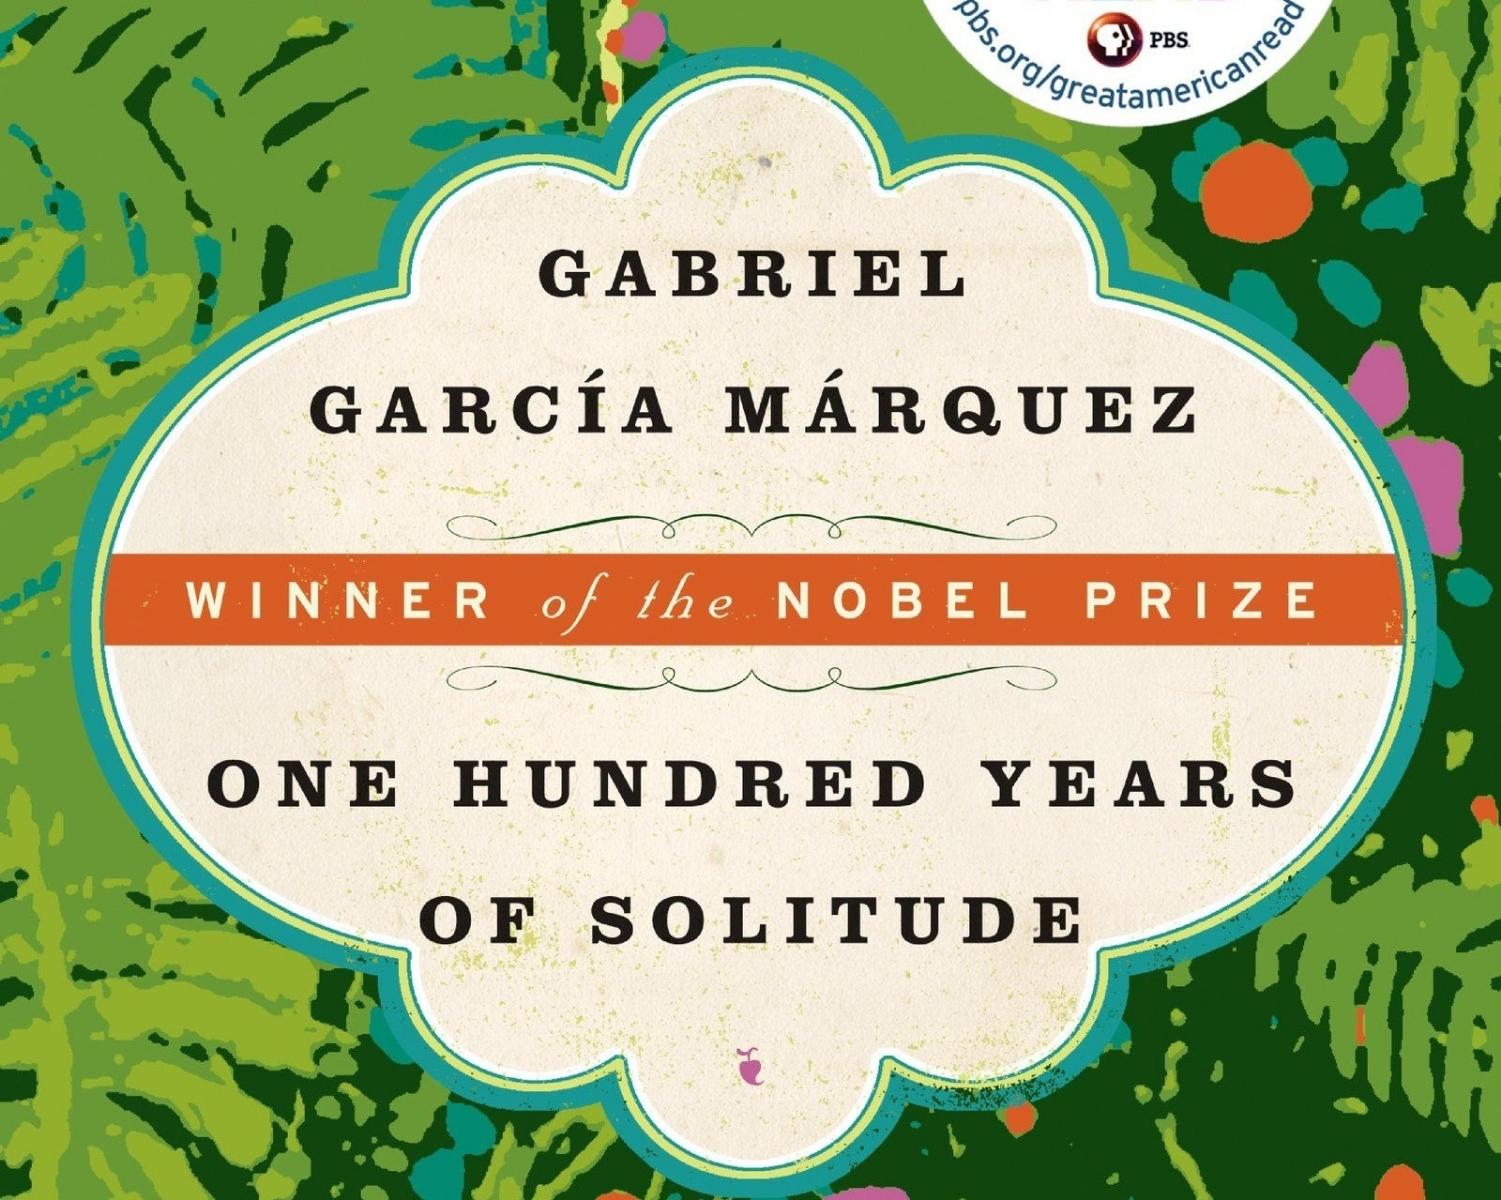 "One Hundred Years of Solitude" by Gabriel García Márquez